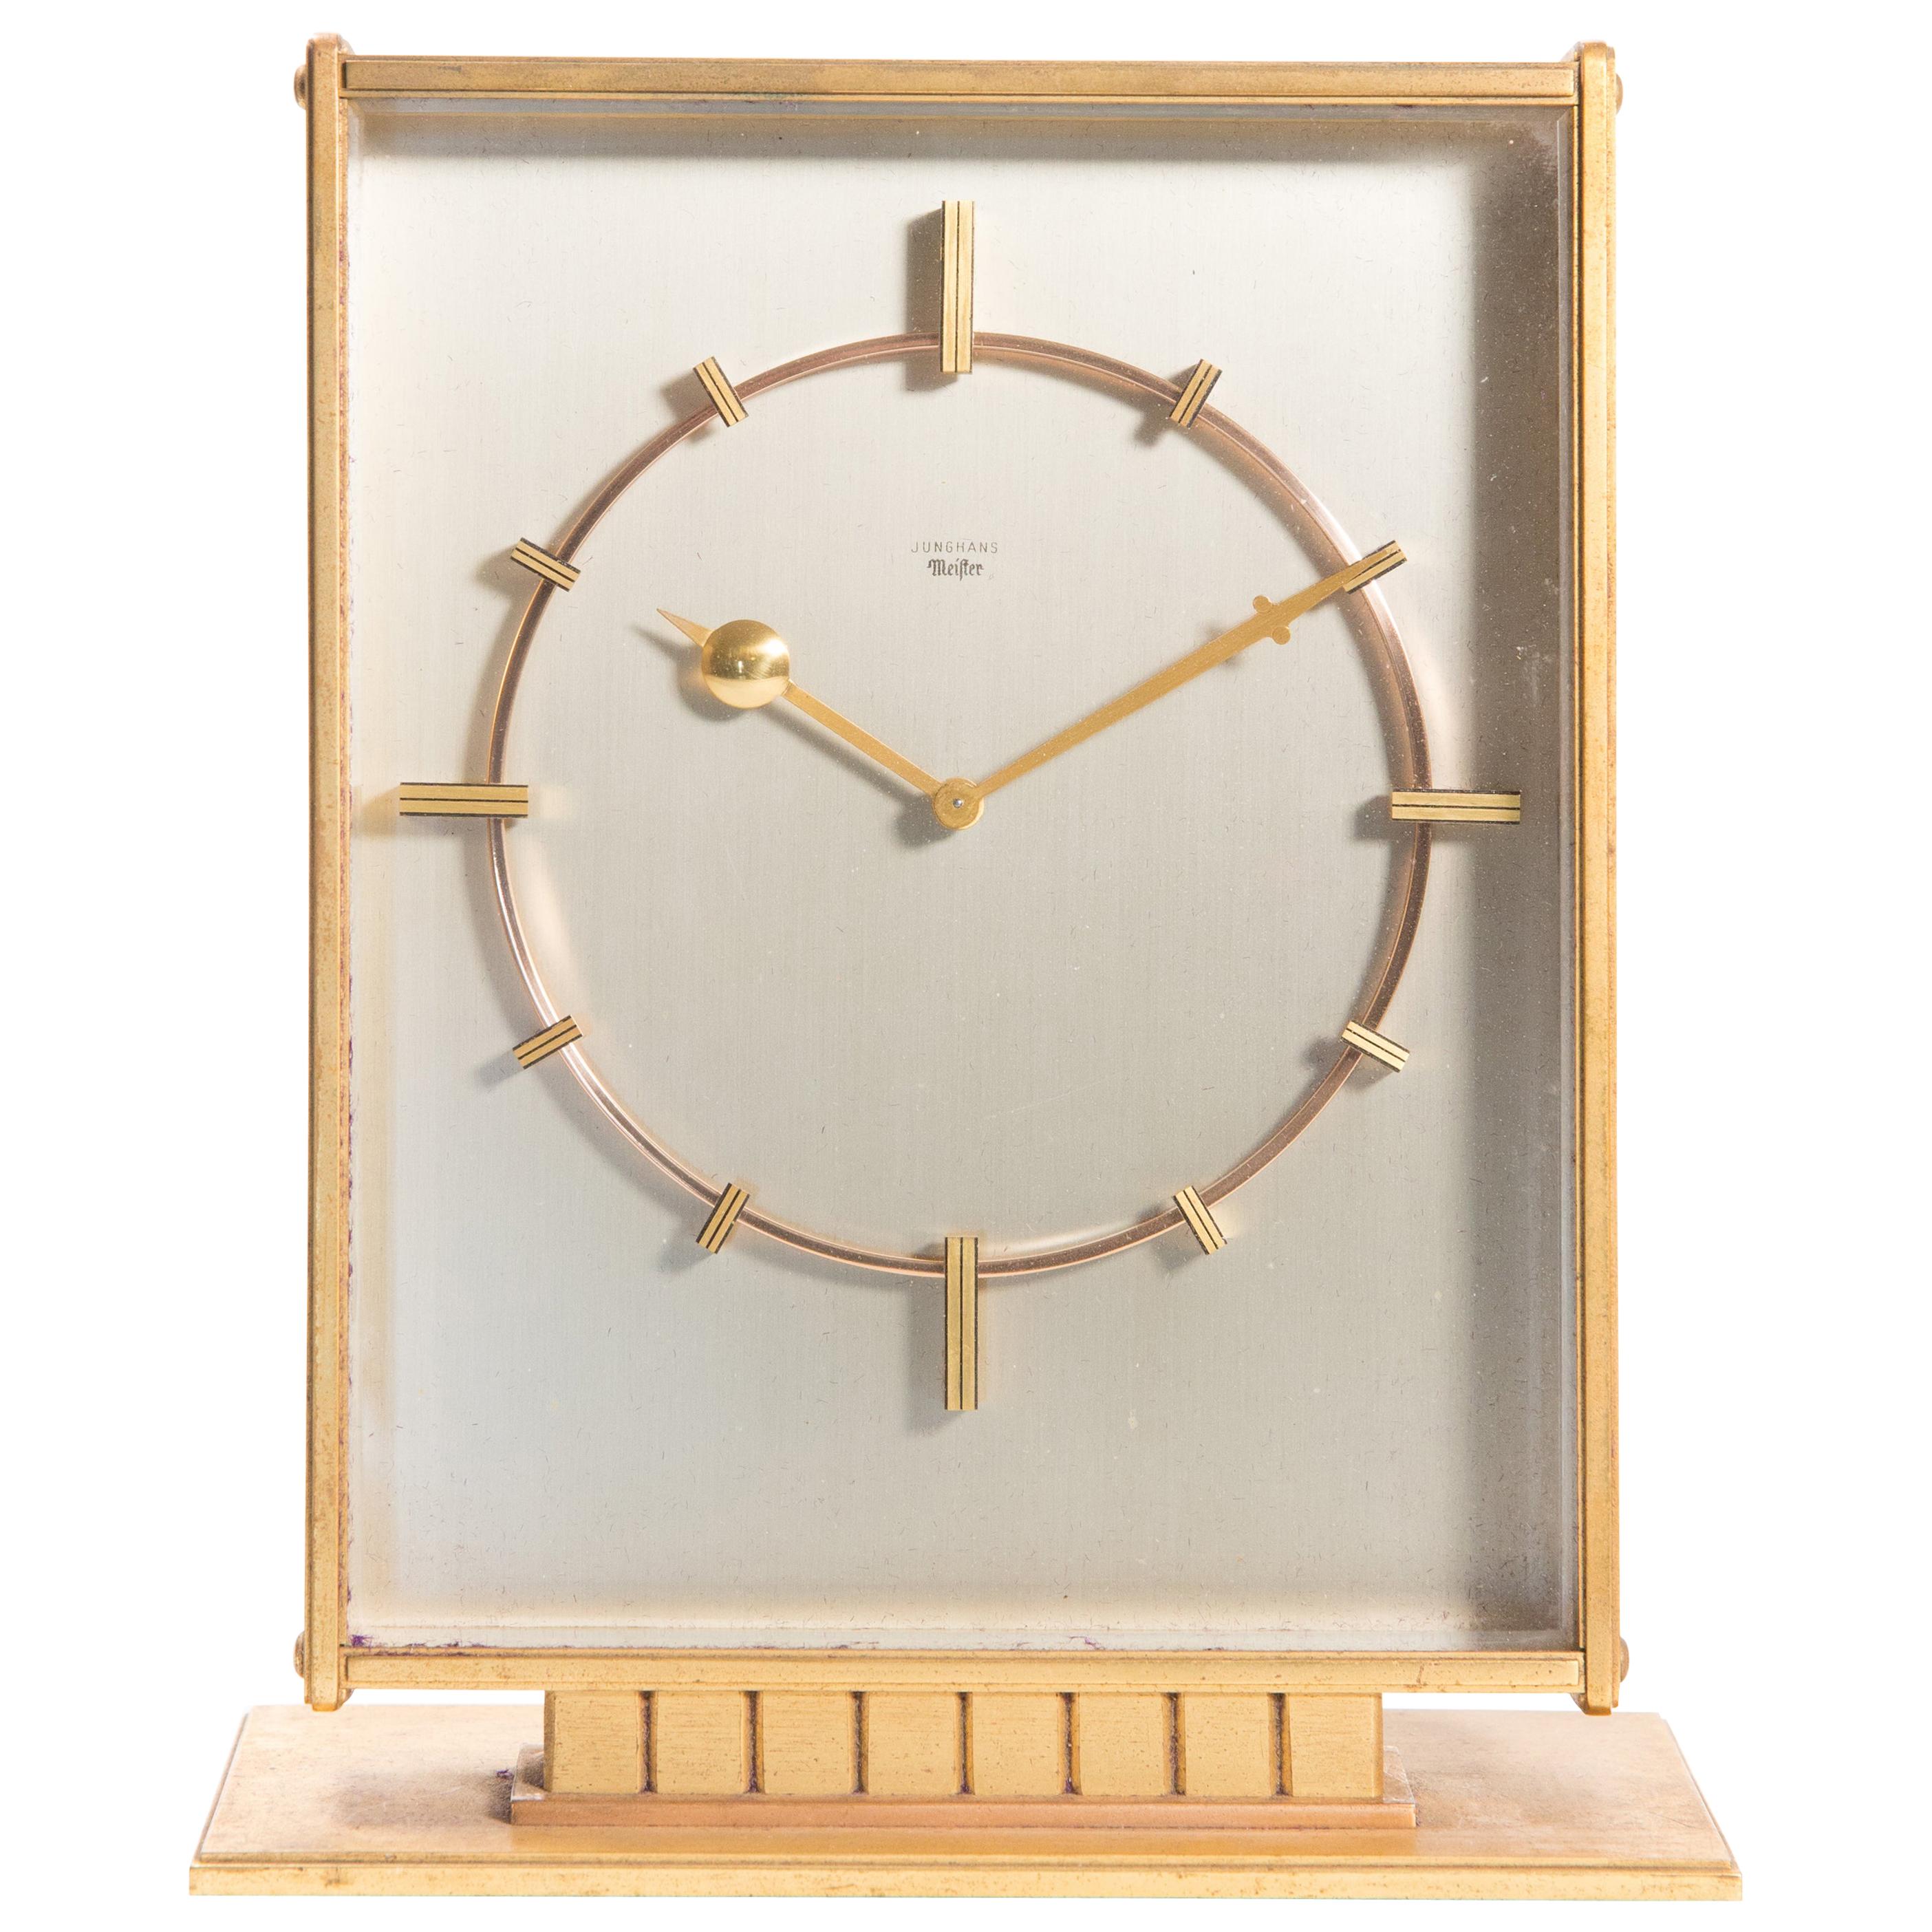 Junghans Mid-Century Modern Large Desk Clock with Jeweled Movement